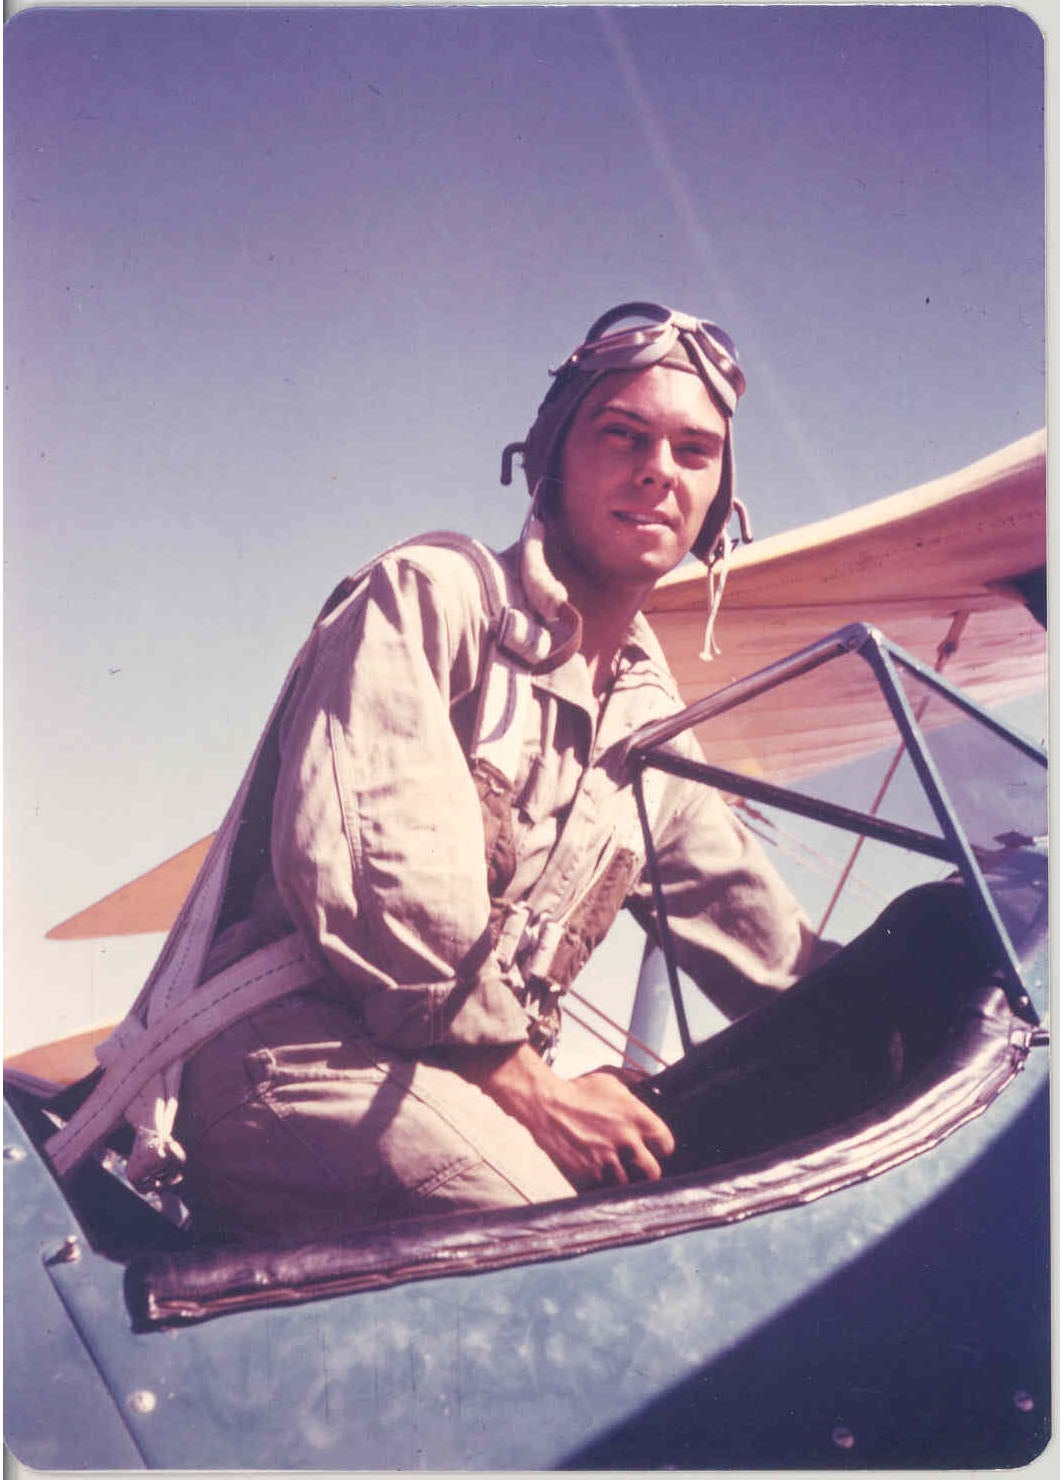 Vintage image of pilot in a propeller plane on Thunderbird School of Global Management's old headquarters.